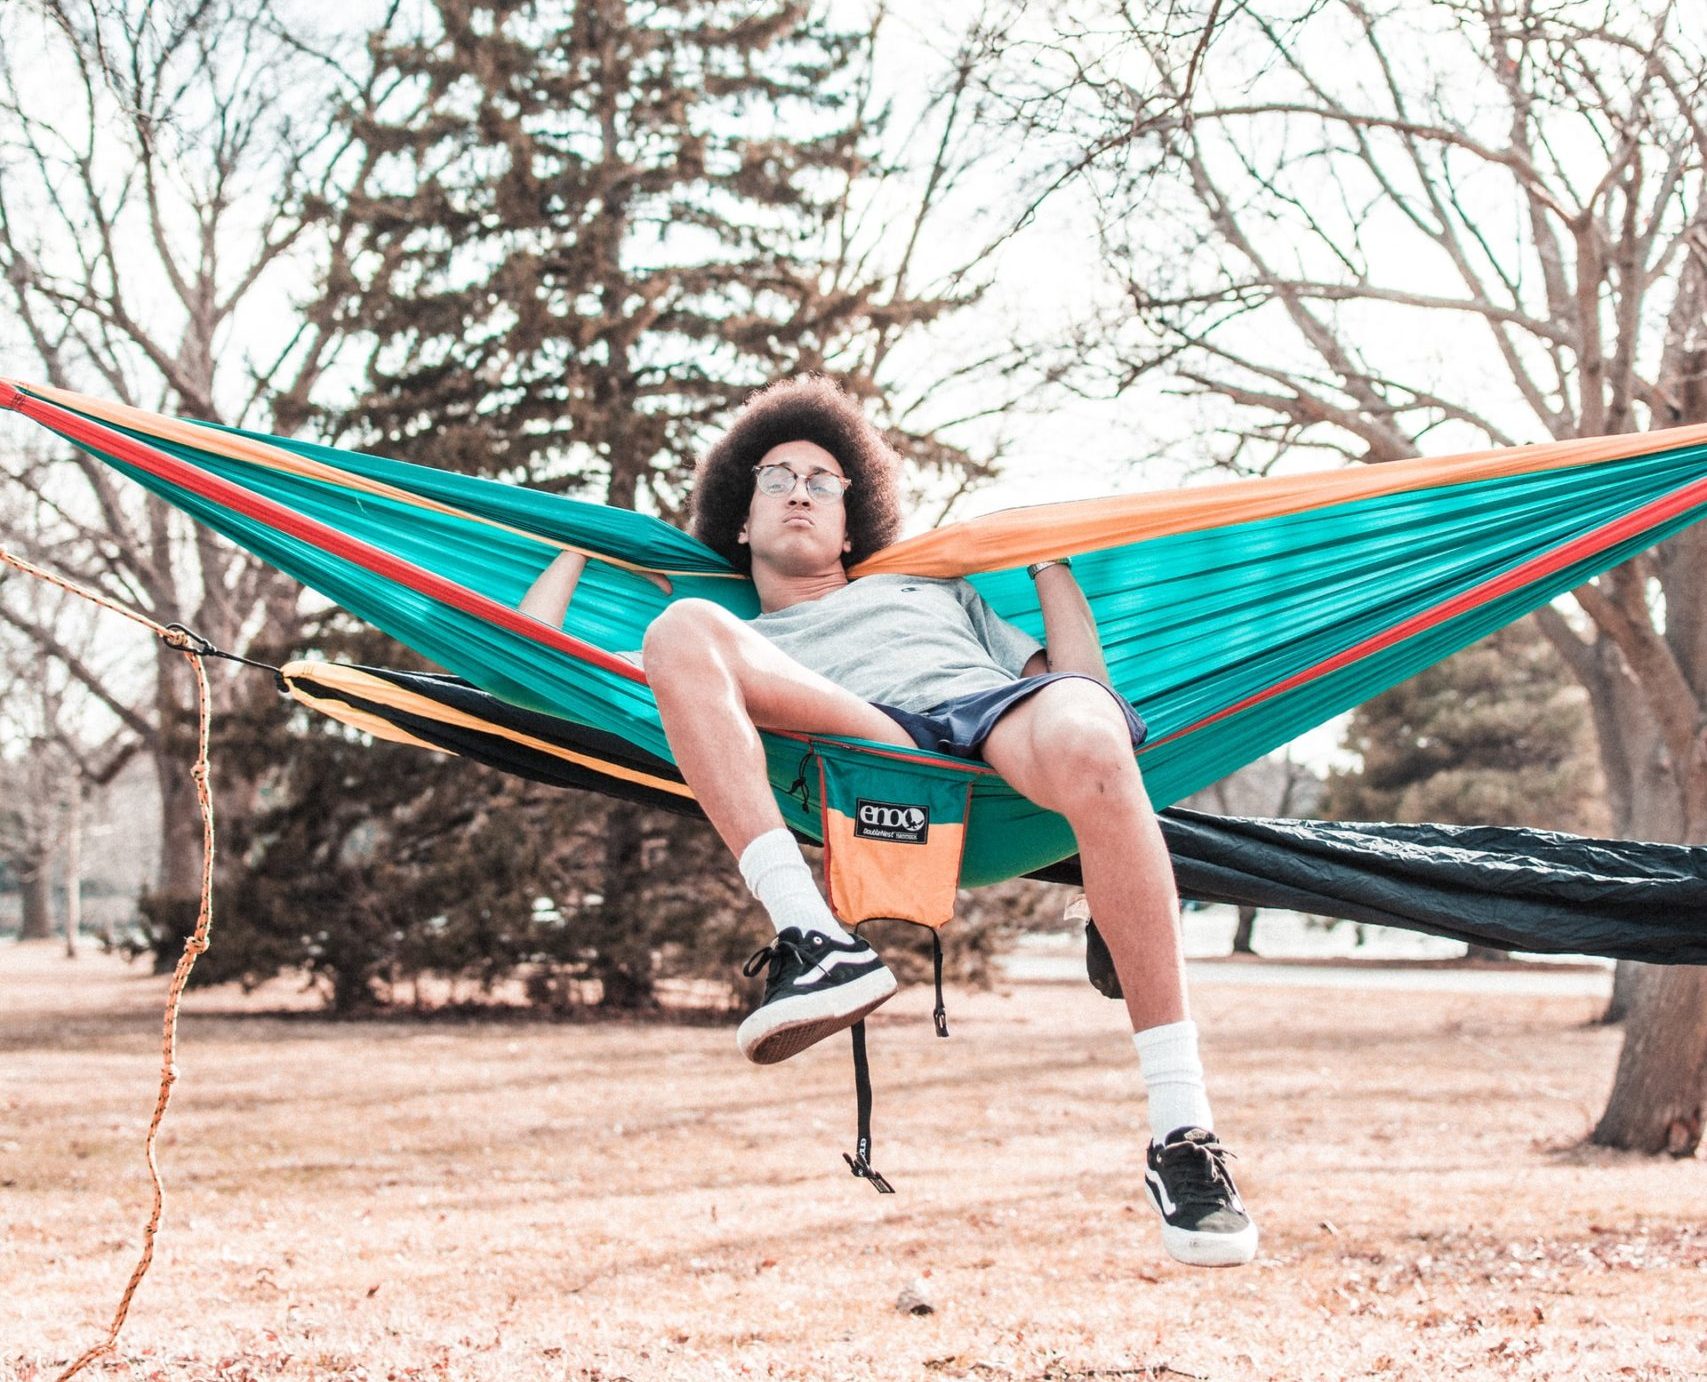 Eno Slap Straps vs. Atlas Straps: Which Strap Is Better for Your Hammock?